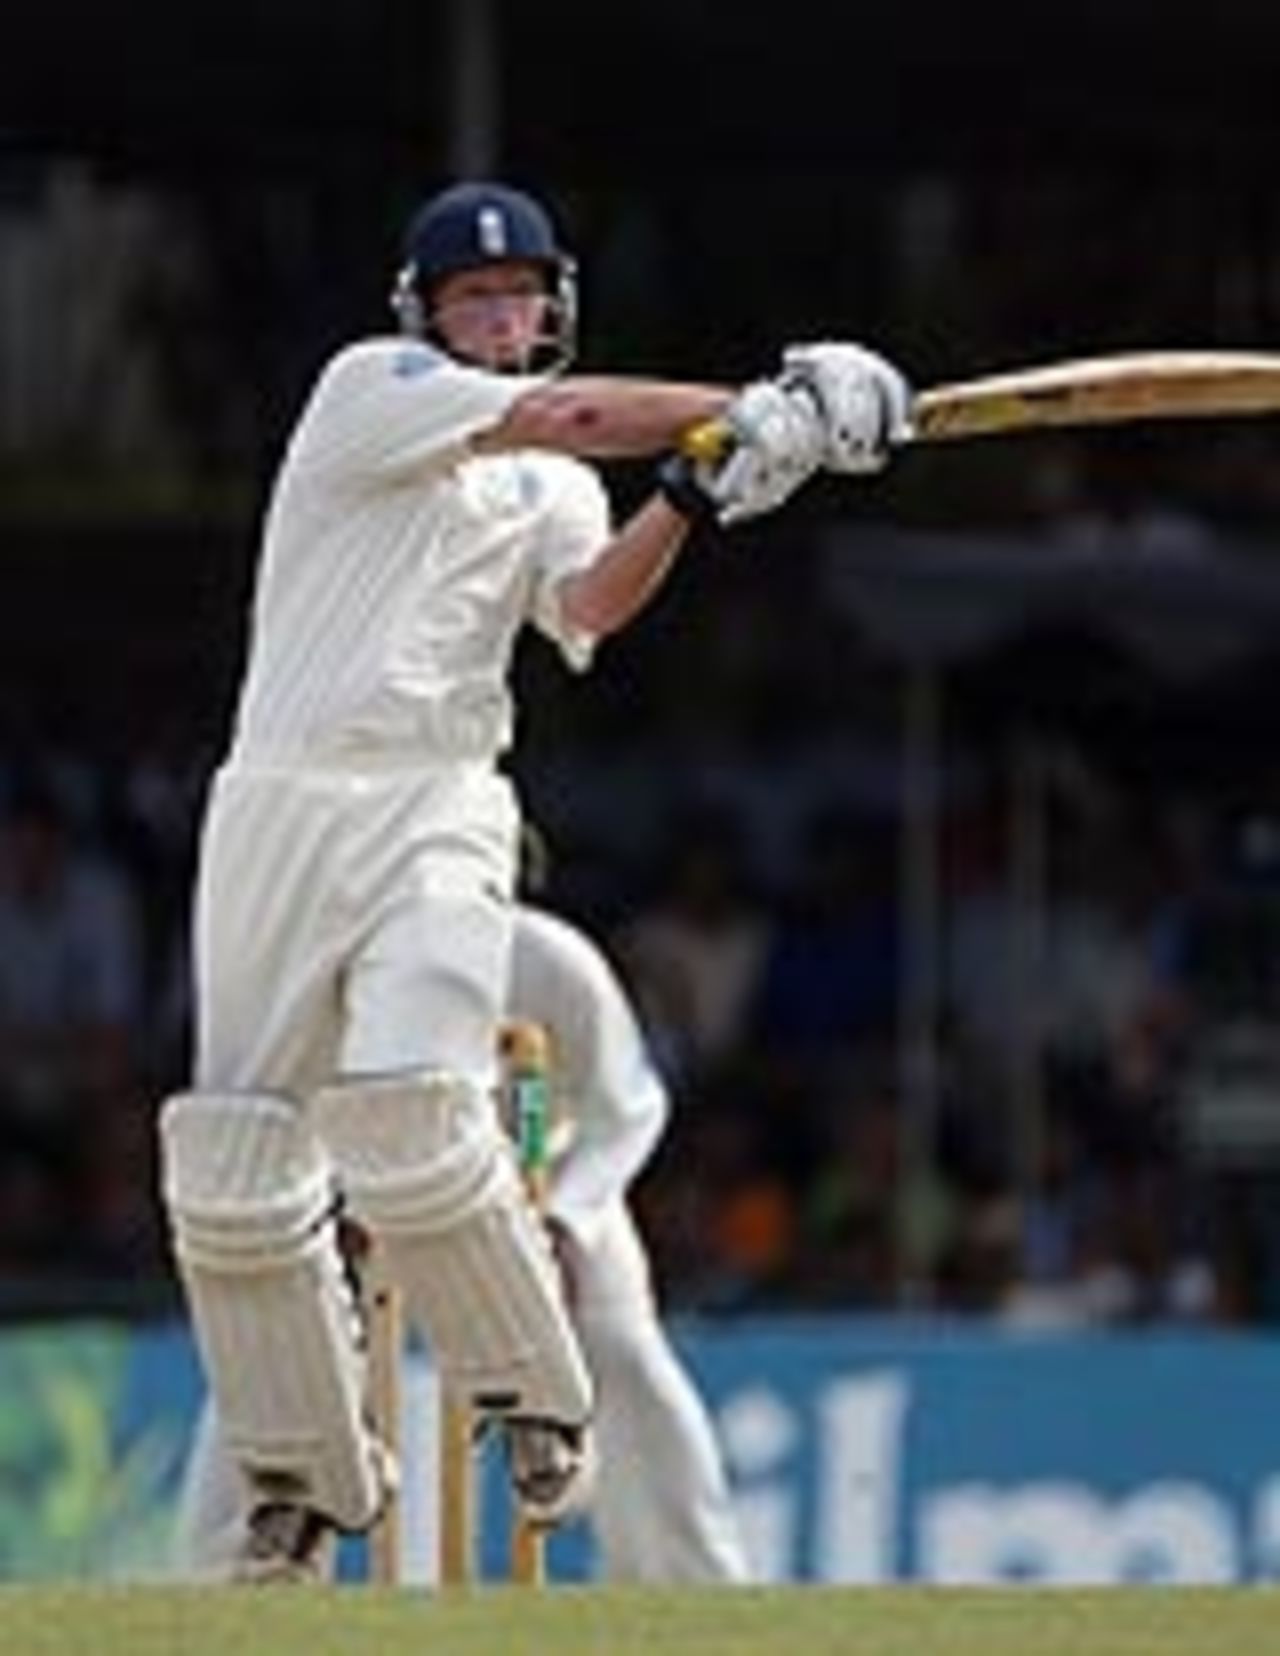 Gareth Batty goes on the attack in Kandy in the second Test